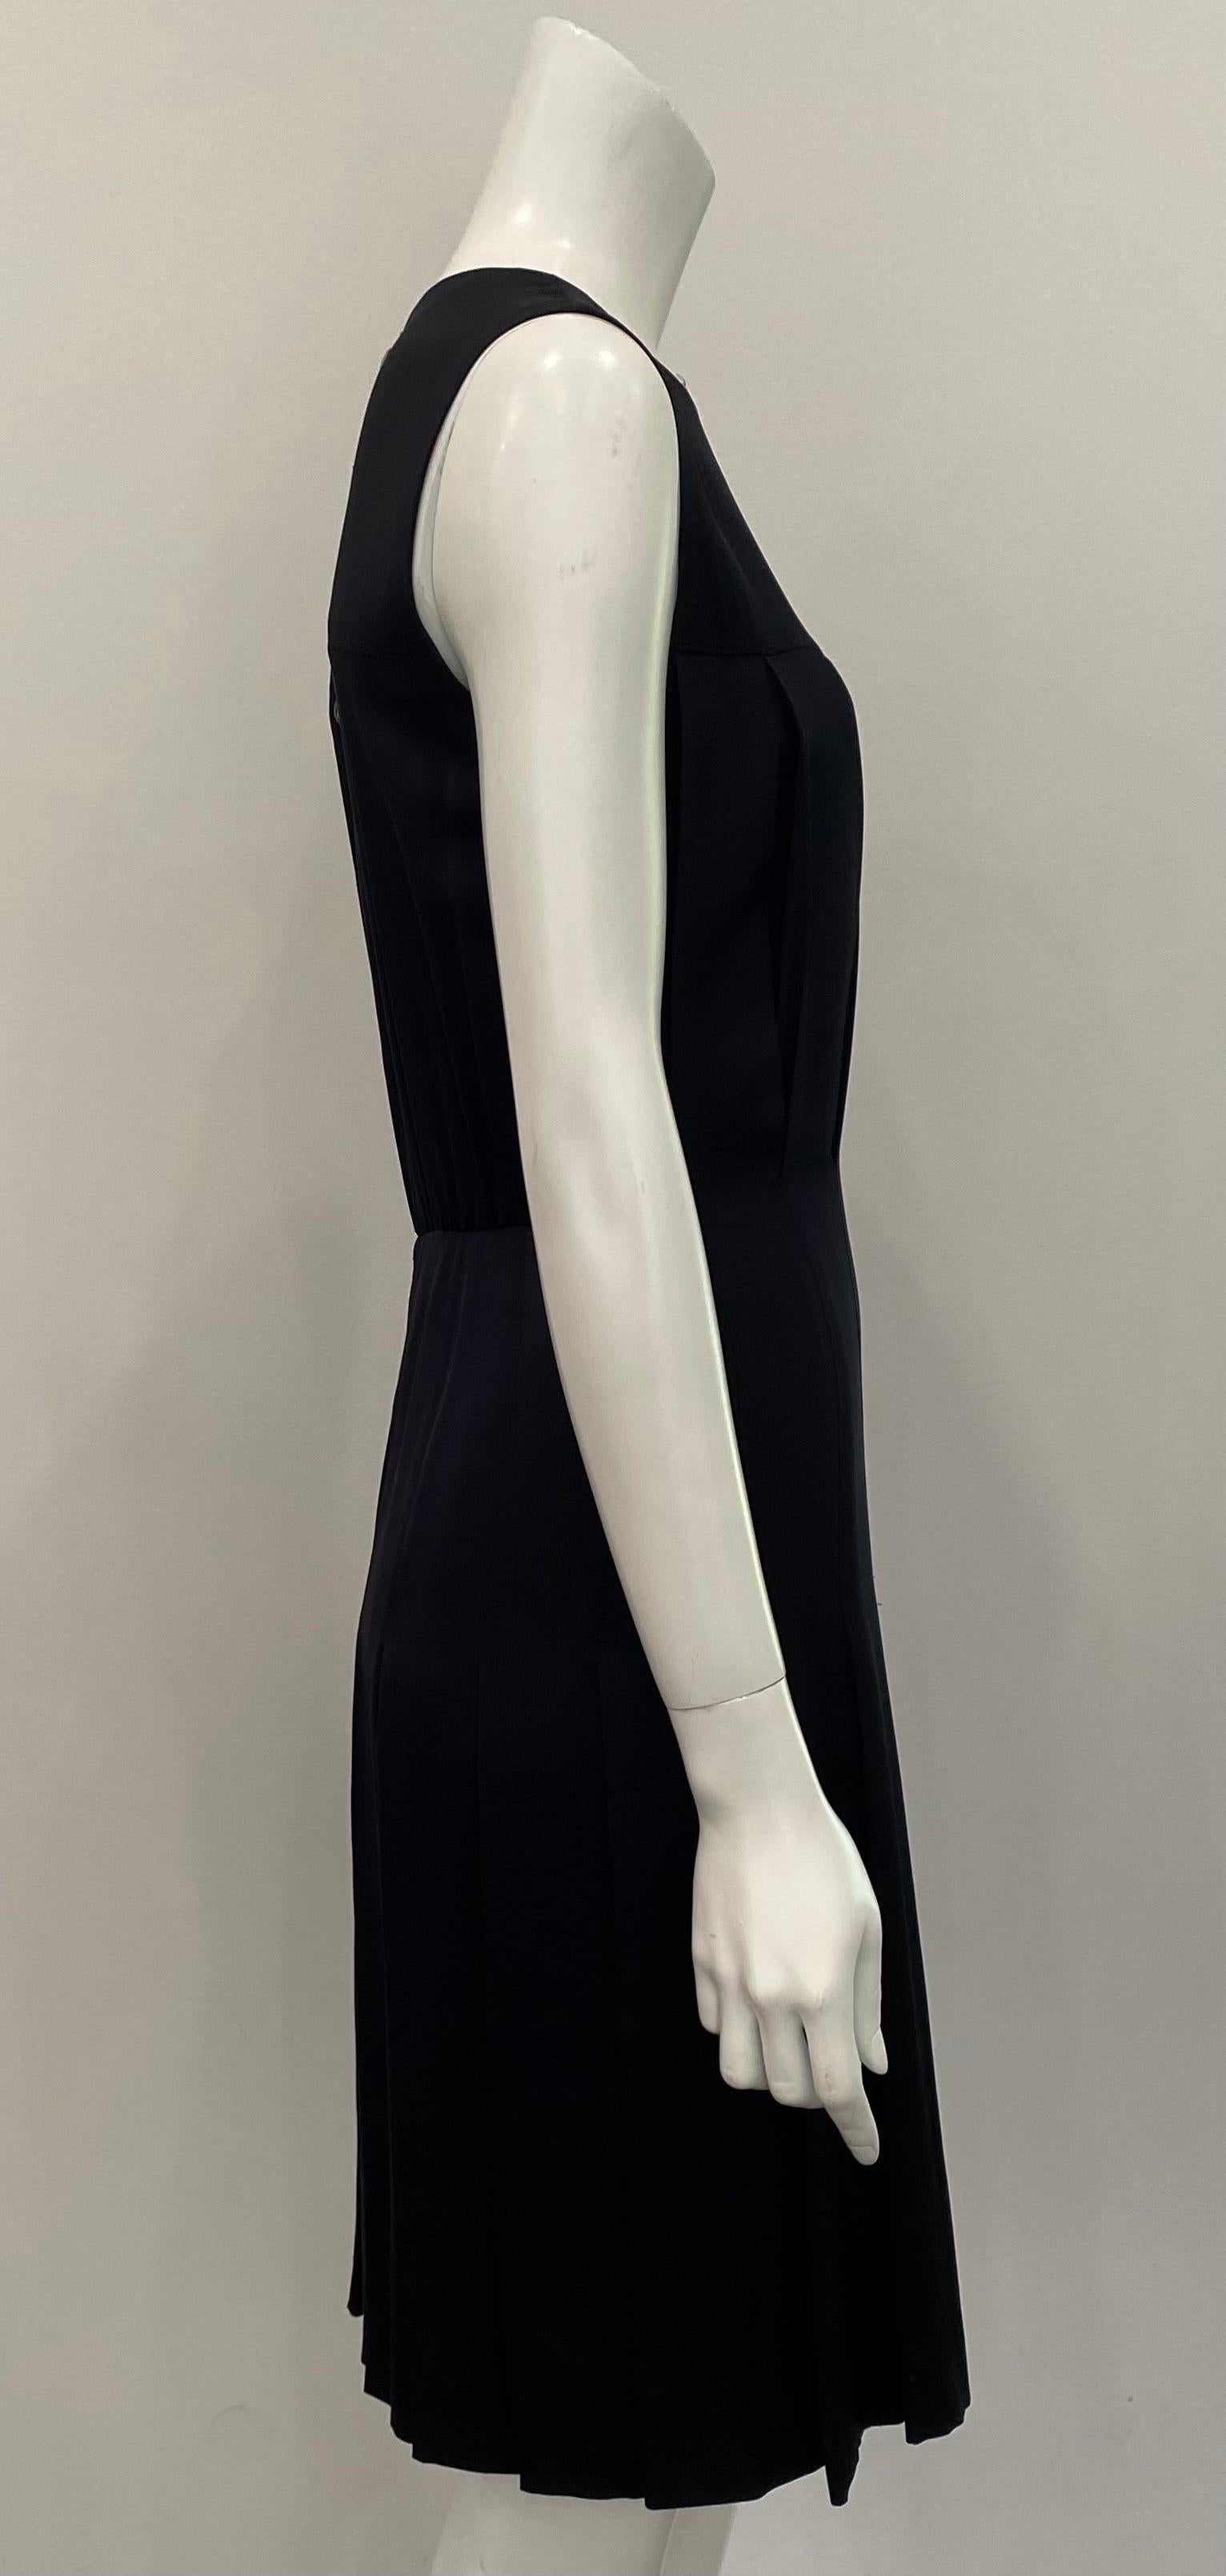 Chanel Black Silk Sleeveless Dress - 36 - Circa 01A In Good Condition For Sale In West Palm Beach, FL